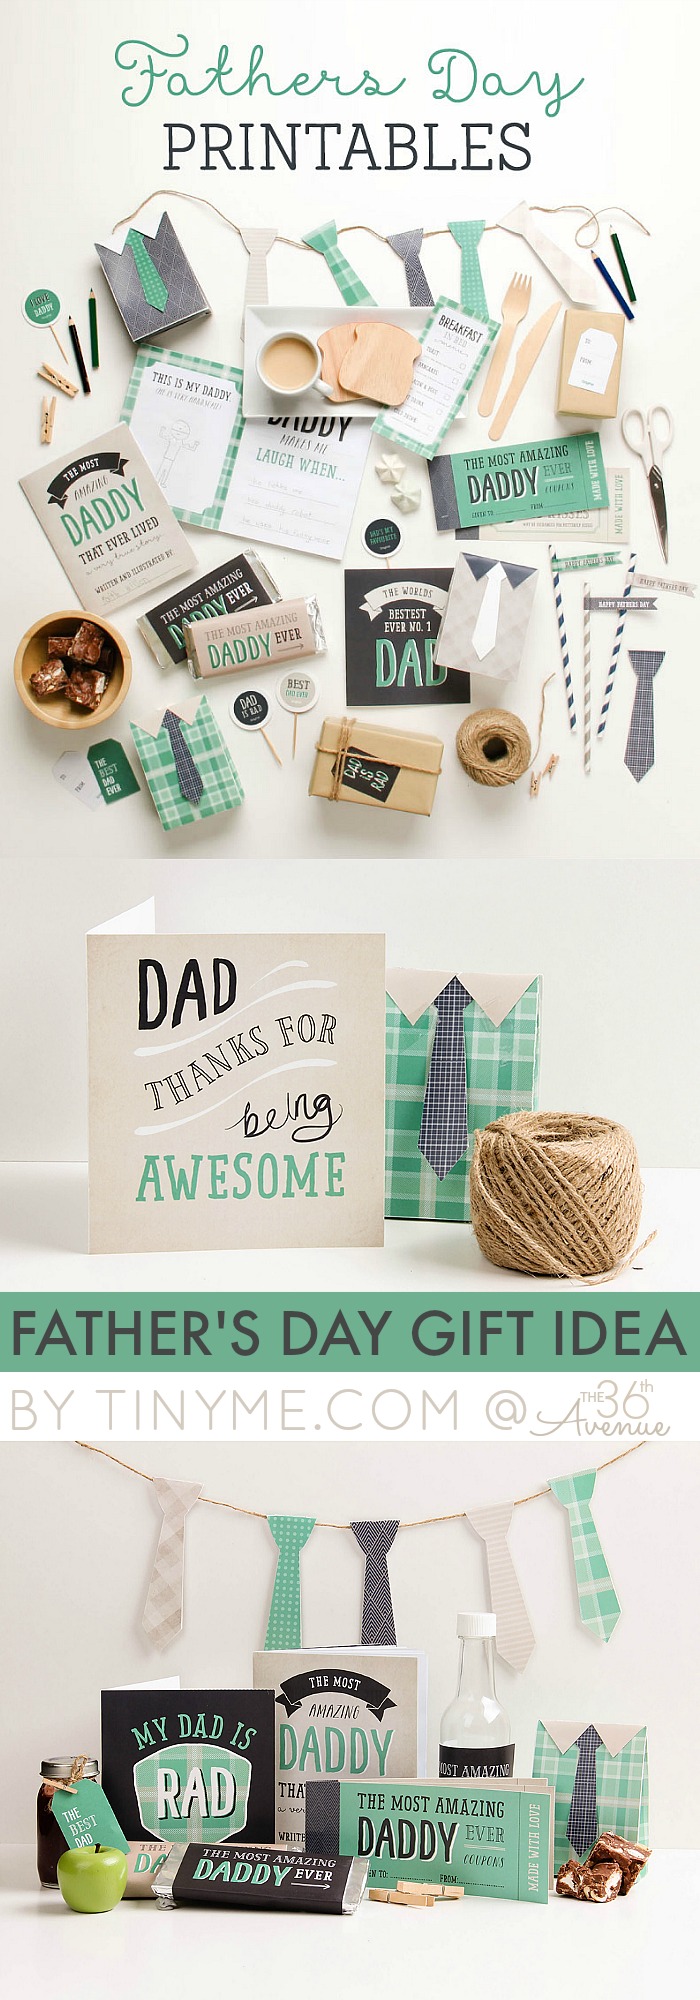 Father's Day Free Printables and Gift Idea by tinyme.com at the36thavenue.com